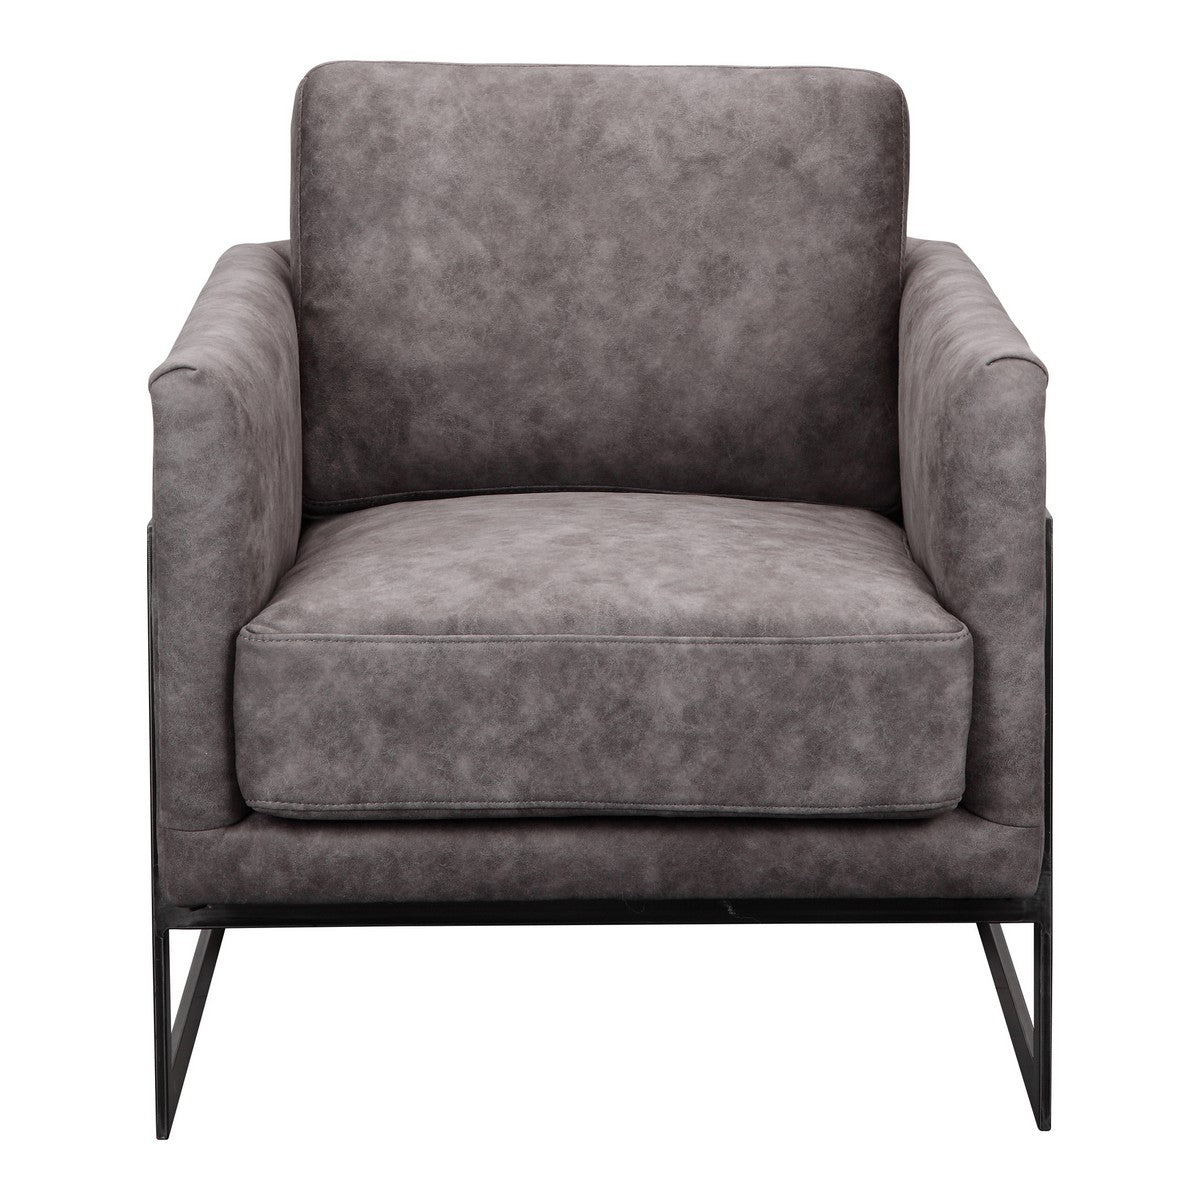 Moe's Home Collection Luxley Club Chair Grey Velvet - PK-1082-15 - Moe's Home Collection - lounge chairs - Minimal And Modern - 1